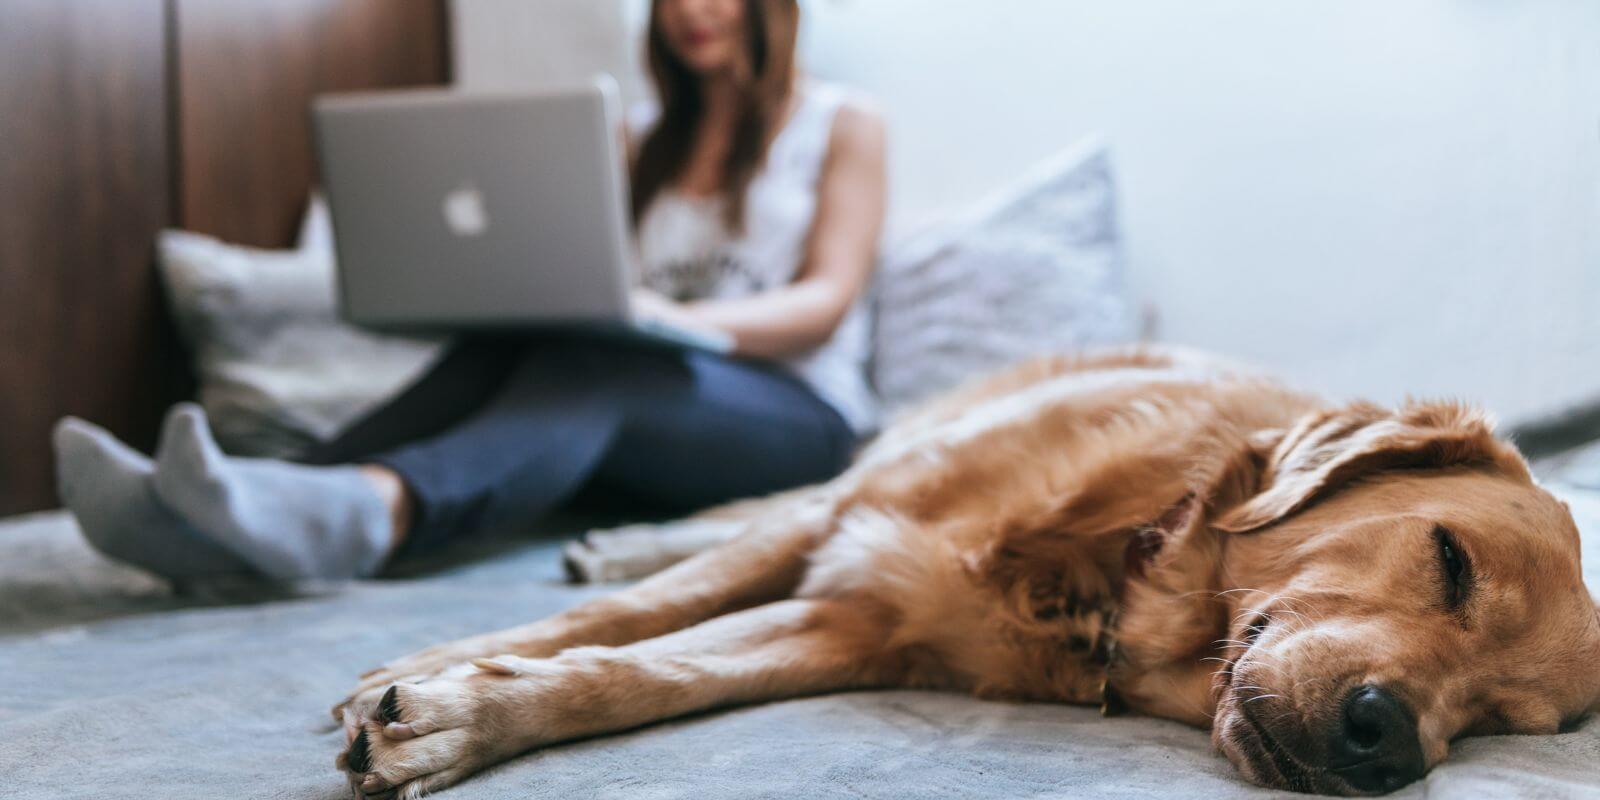 Woman sitting on her bed working on her laptop with dog lying on the bed